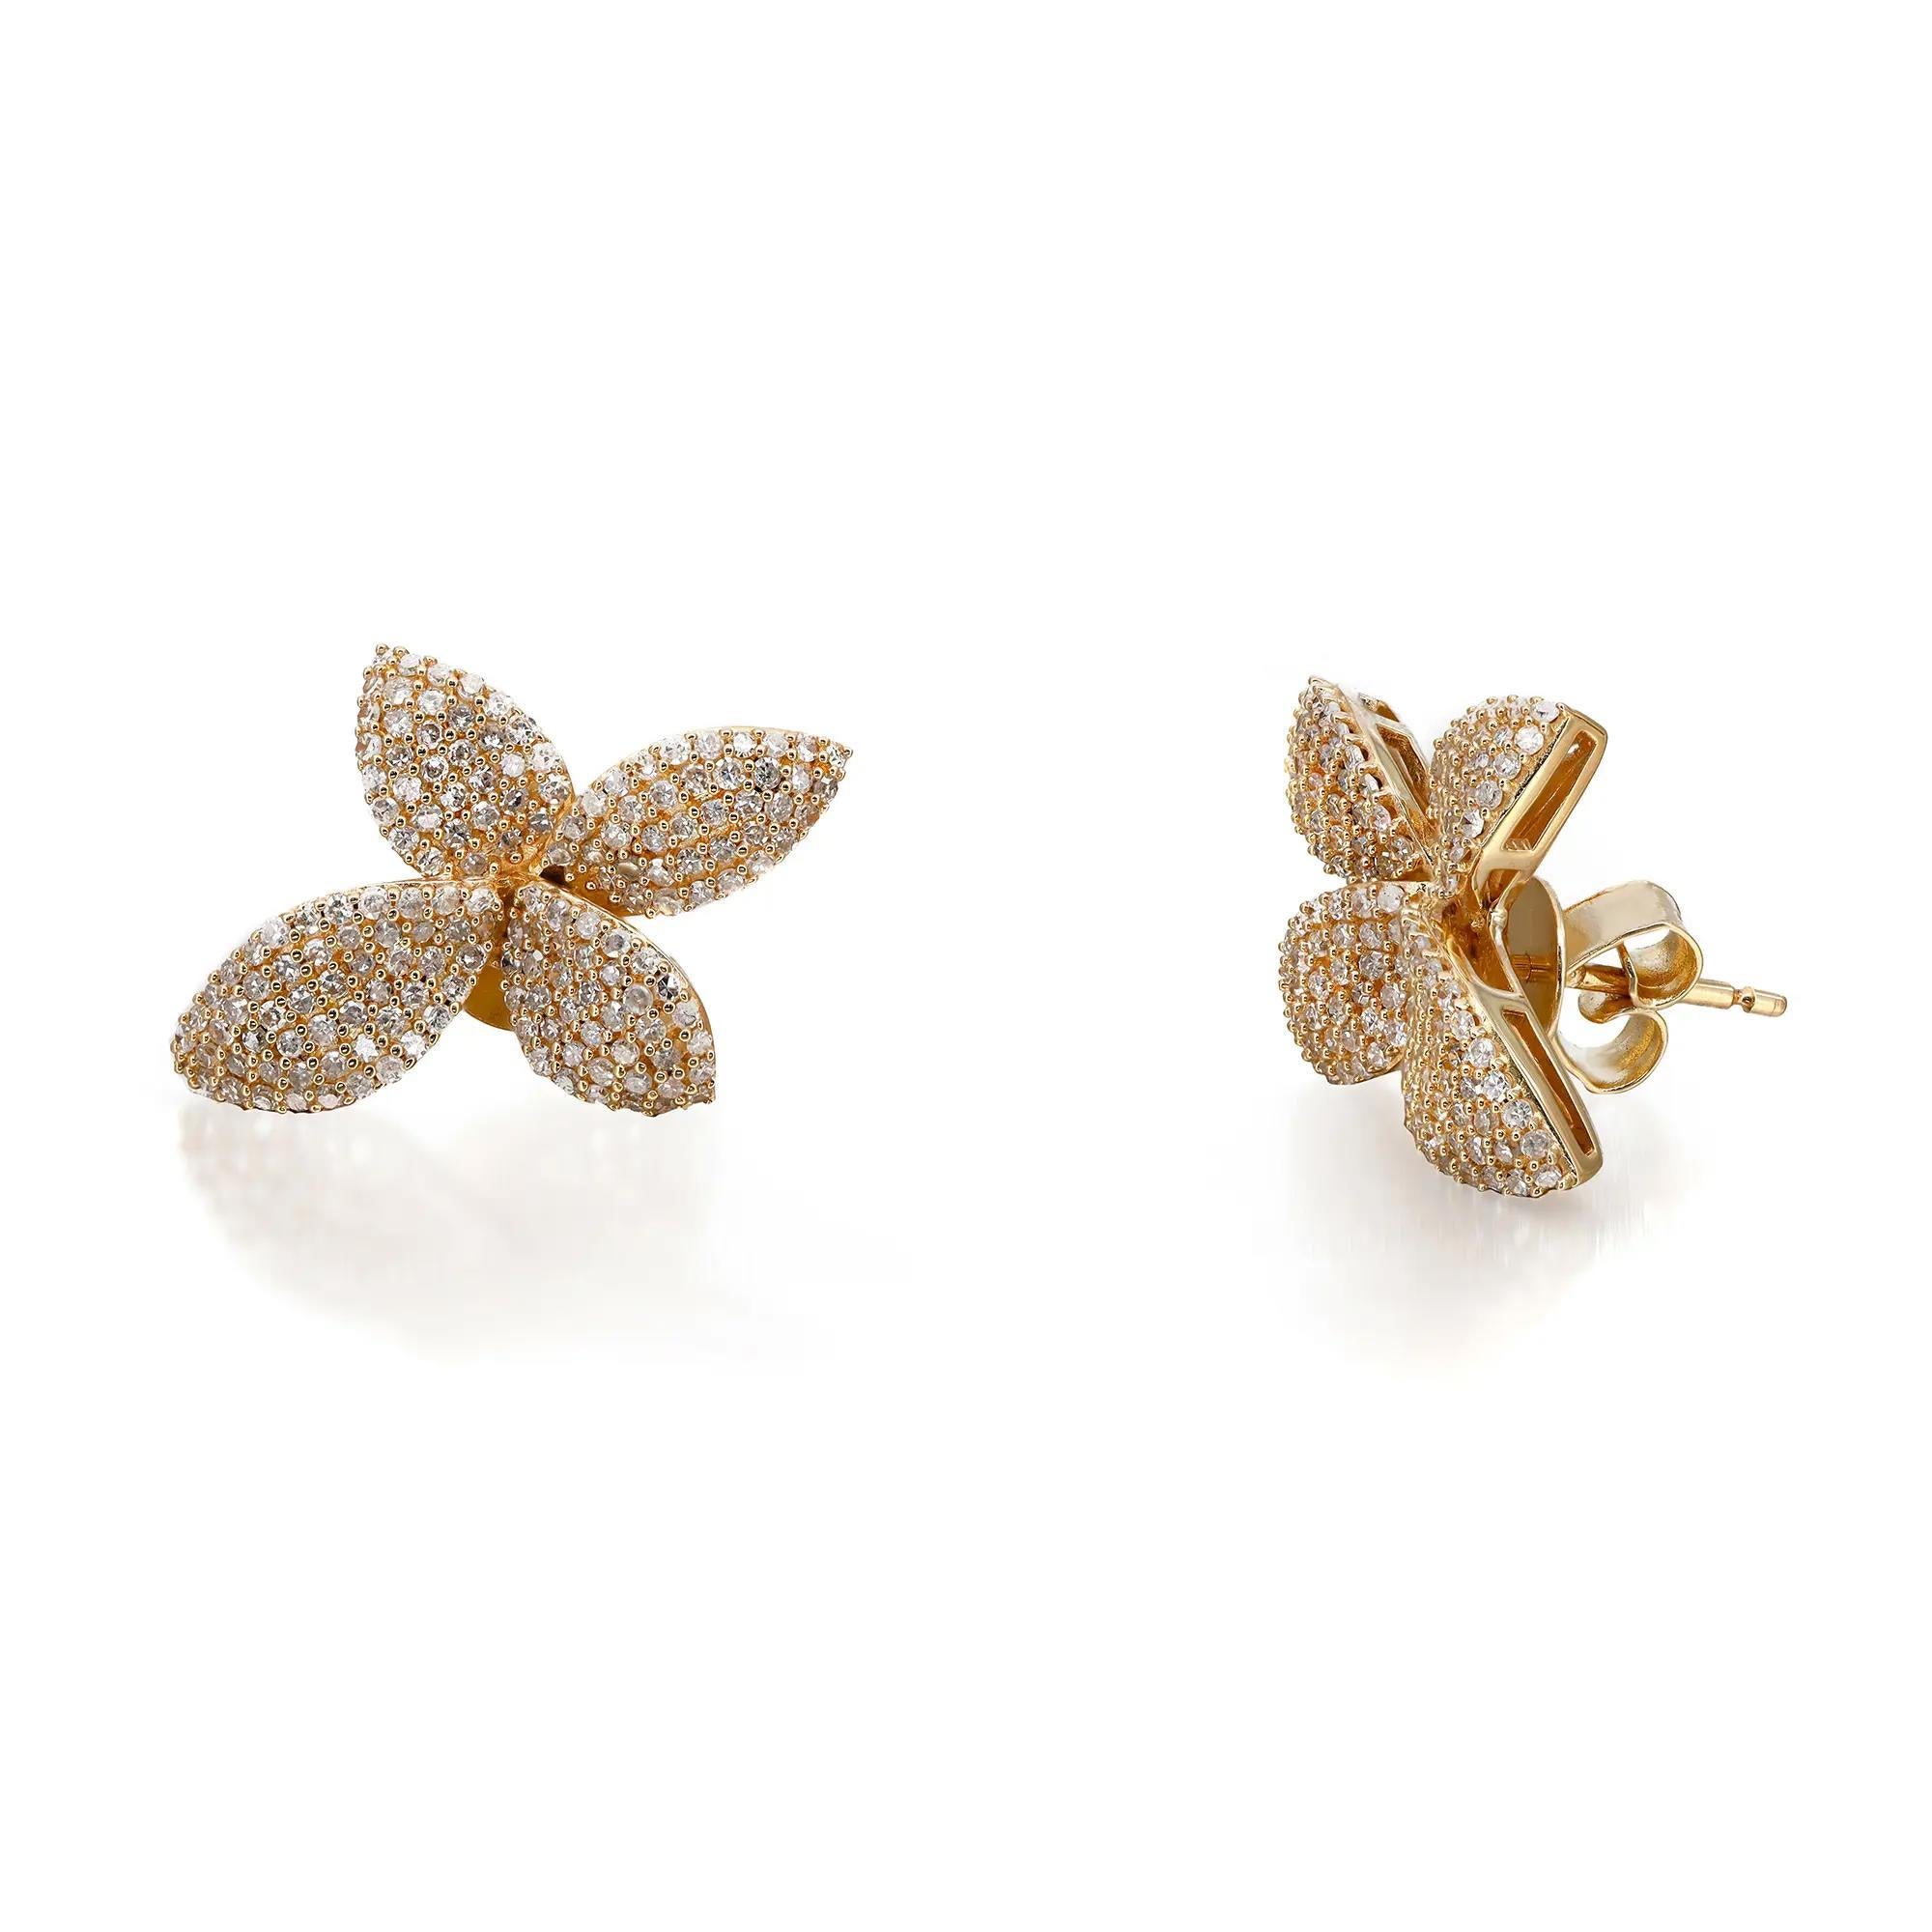 Diamonds in full bloom. These stunning diamond flower stud earrings are crafted in 14K yellow gold. Showcases pave set round brilliant cut diamonds weighing 1.00 carats. Diamond quality: color I and clarity SI. Earring size: 16.4mm x 22mm. Total